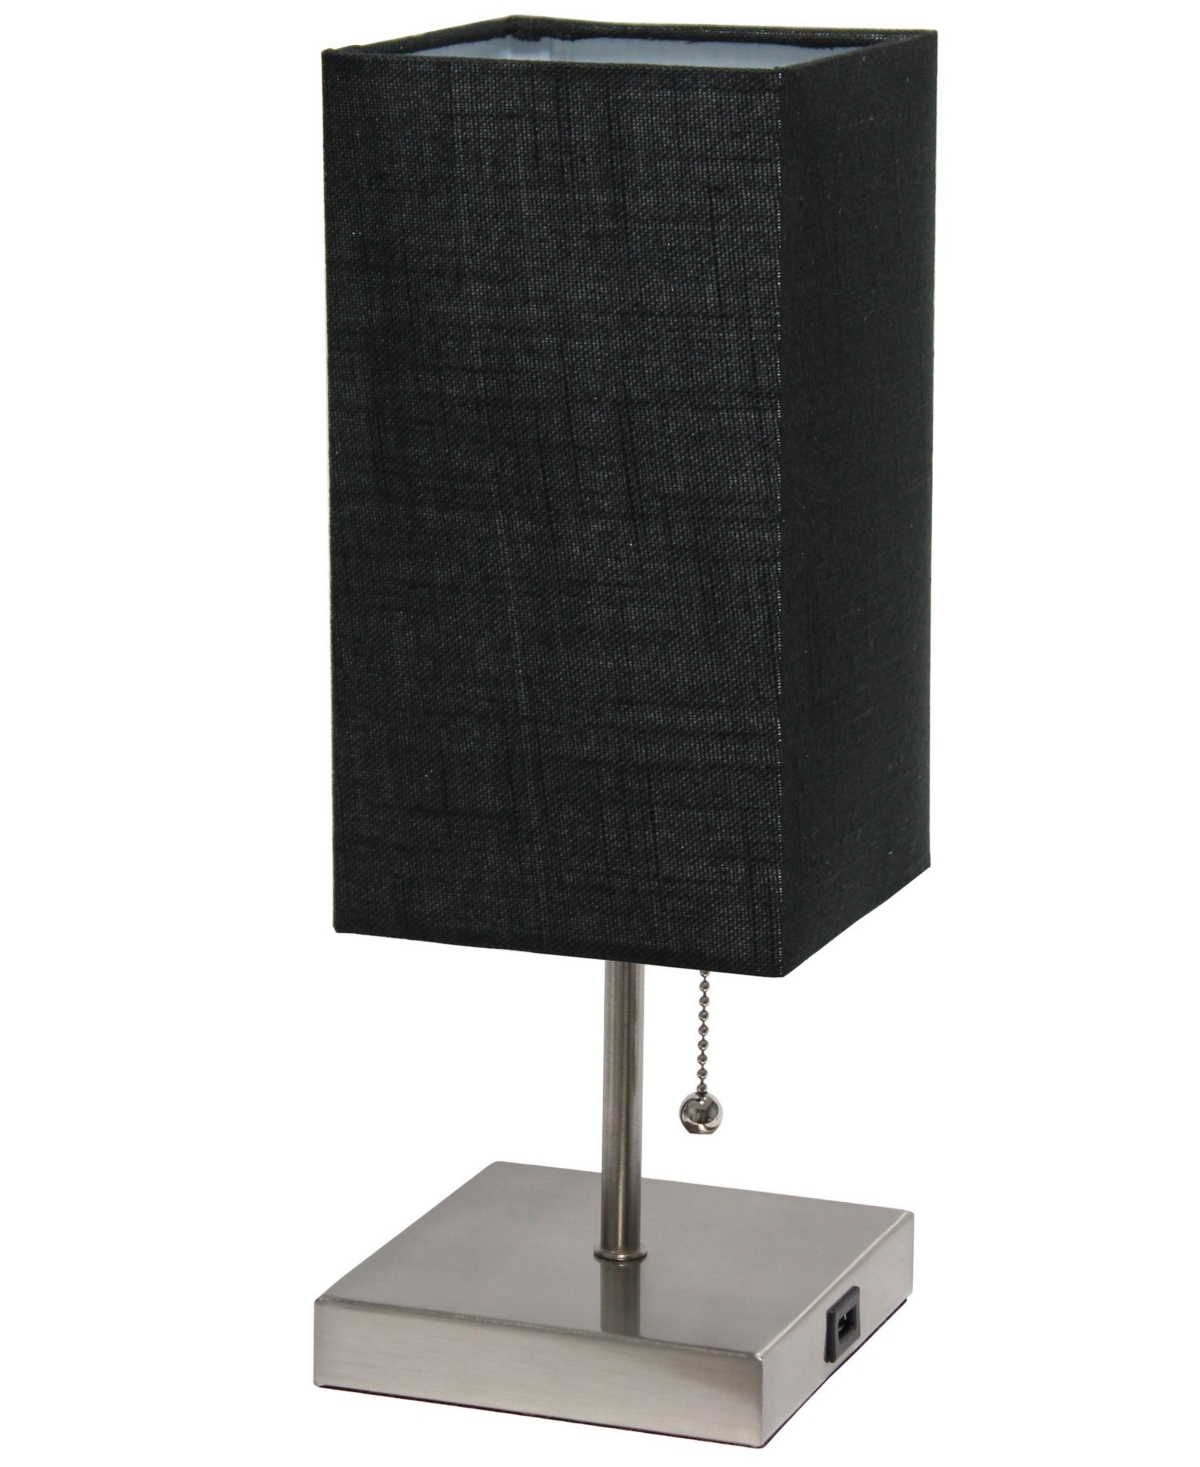 Simple Designs Petite Stick Lamp With Usb Charging Port And Shade In Black Shade,brushed Nickel Base